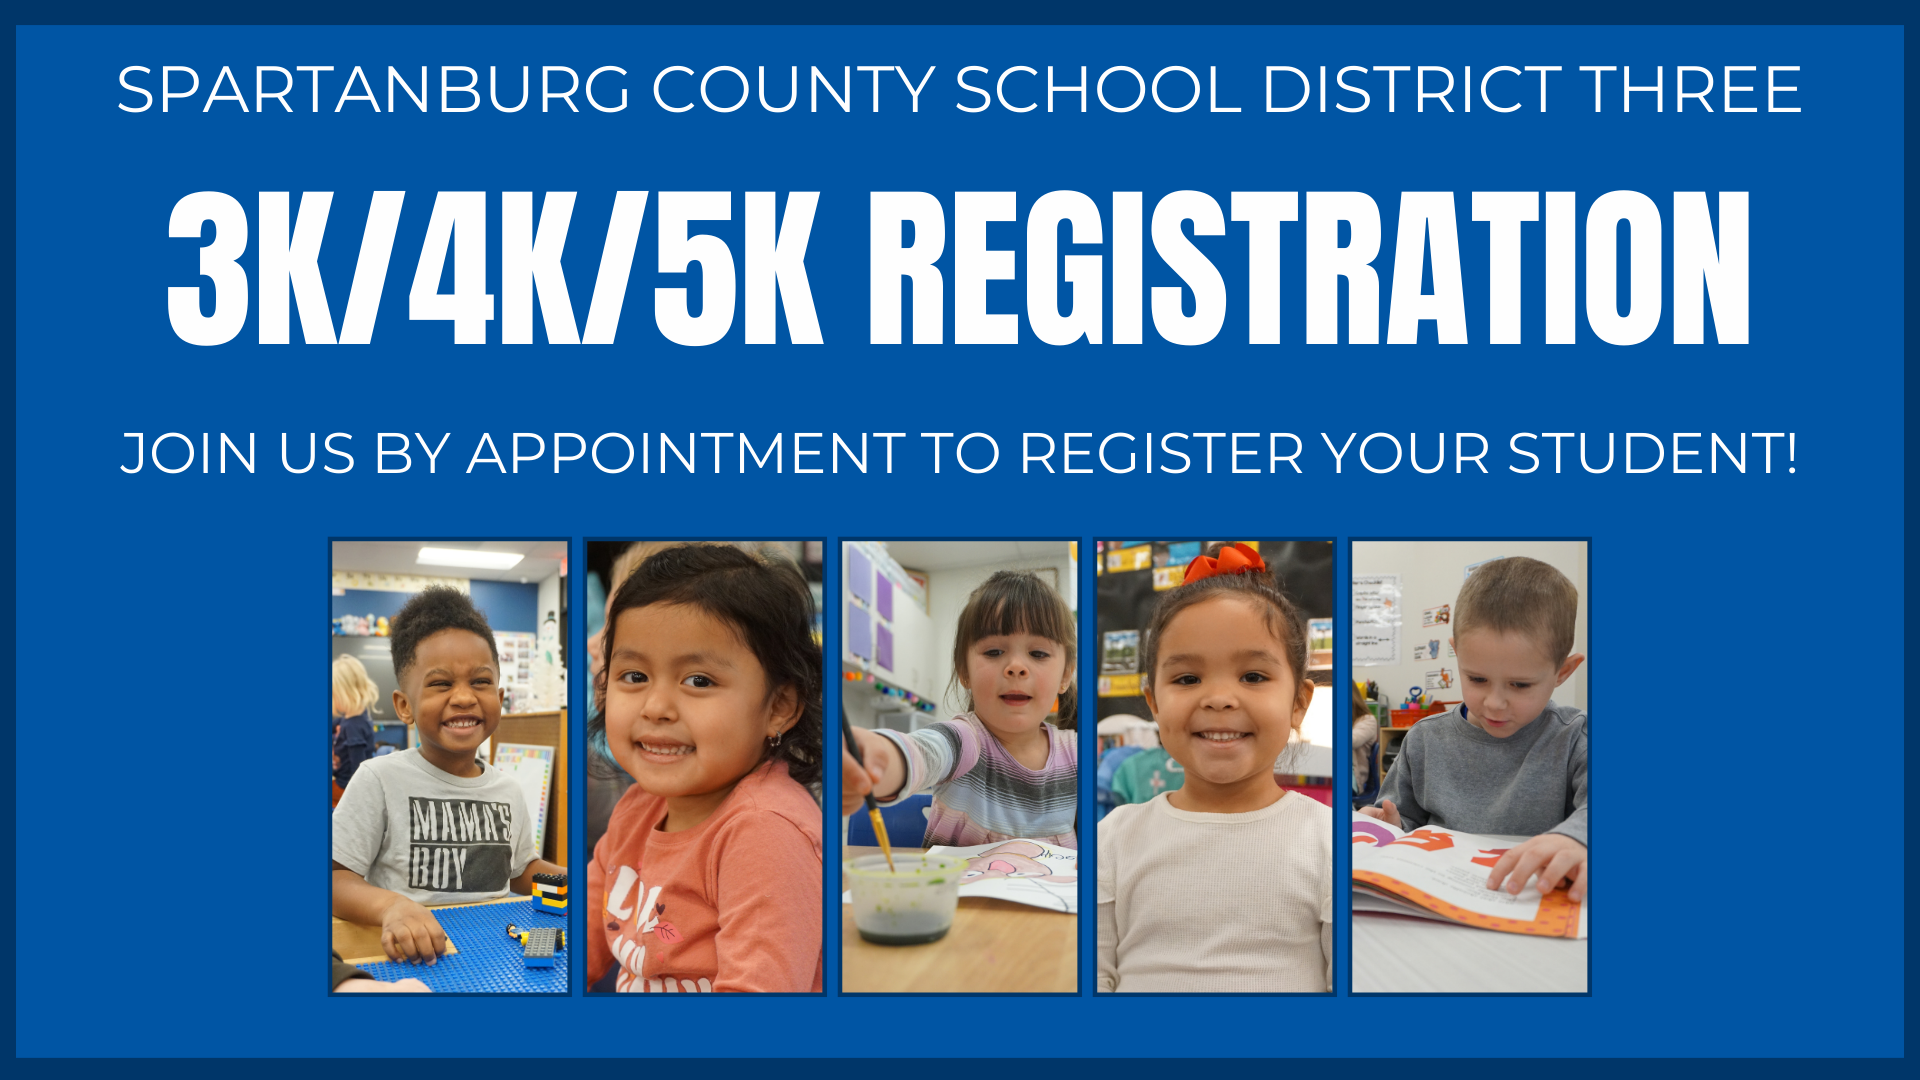 Spartanburg county school district three 4k/5k registration! Join us by appointment  to register your student! 5 images of elementary students smiling at the camera.